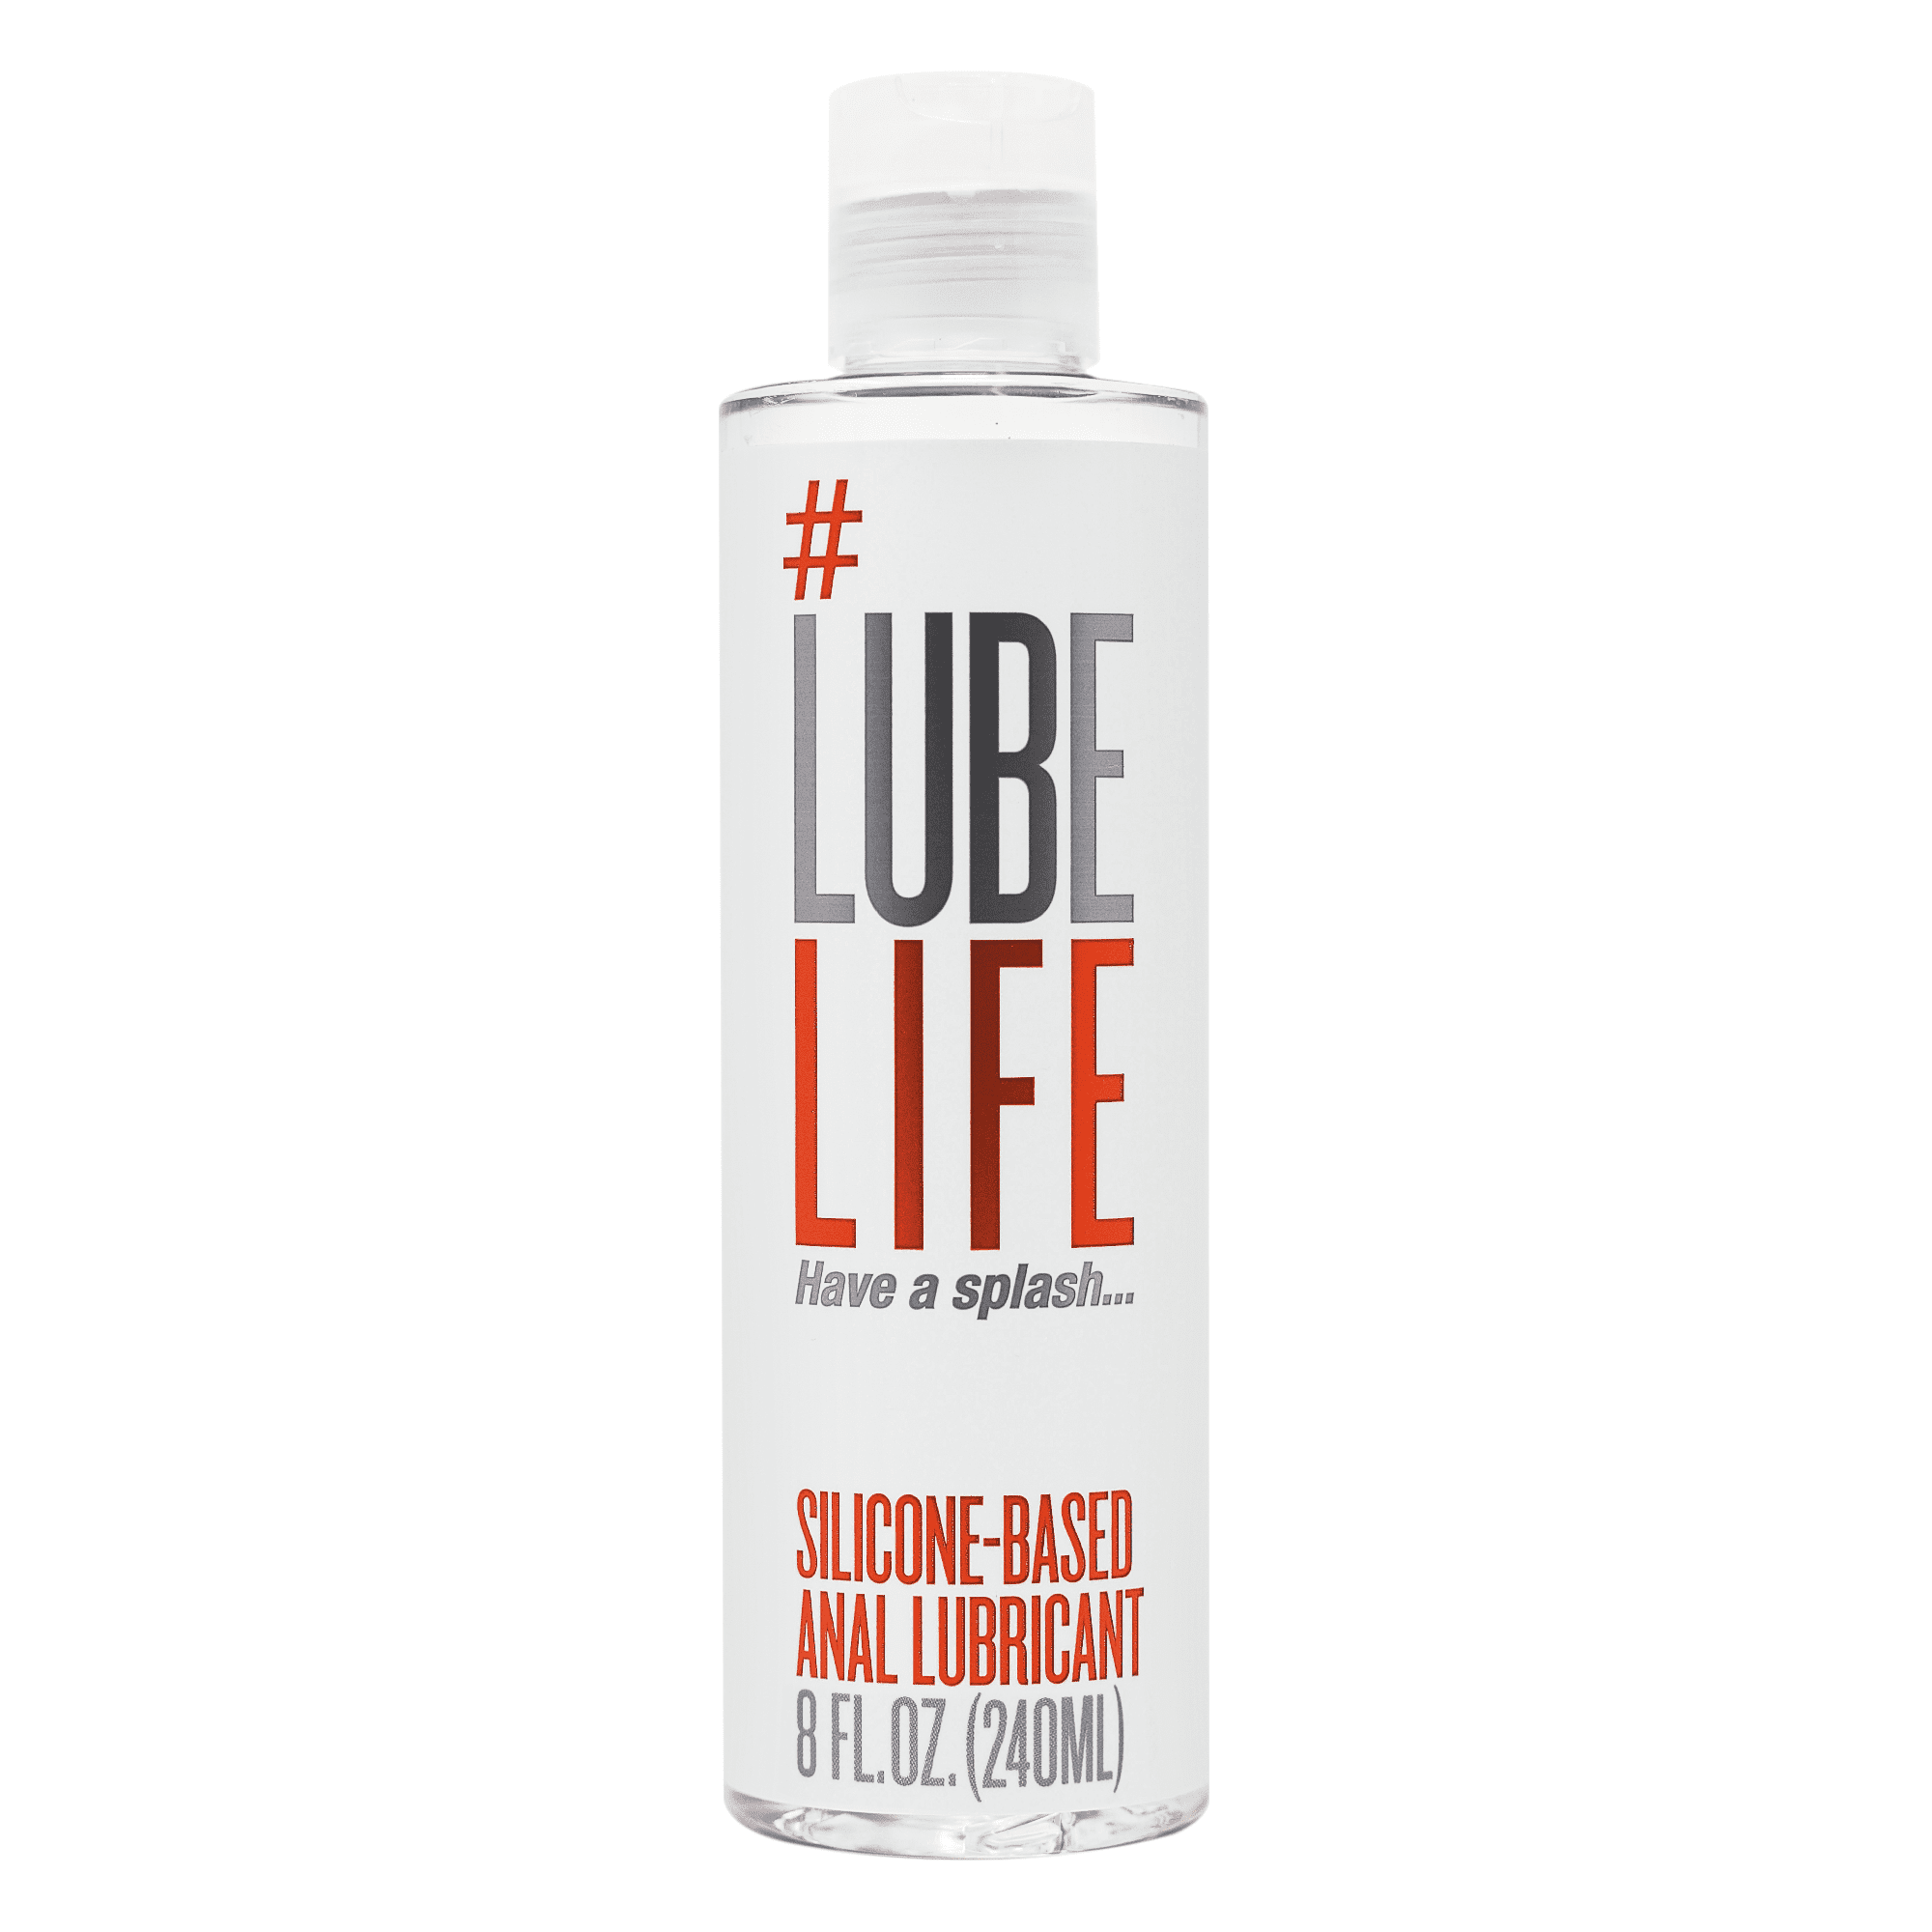 Lube Life Anal Silicone Based Lubricant, Thick Silicone Lube for Men, Women and Couples, 8 fl oz picture